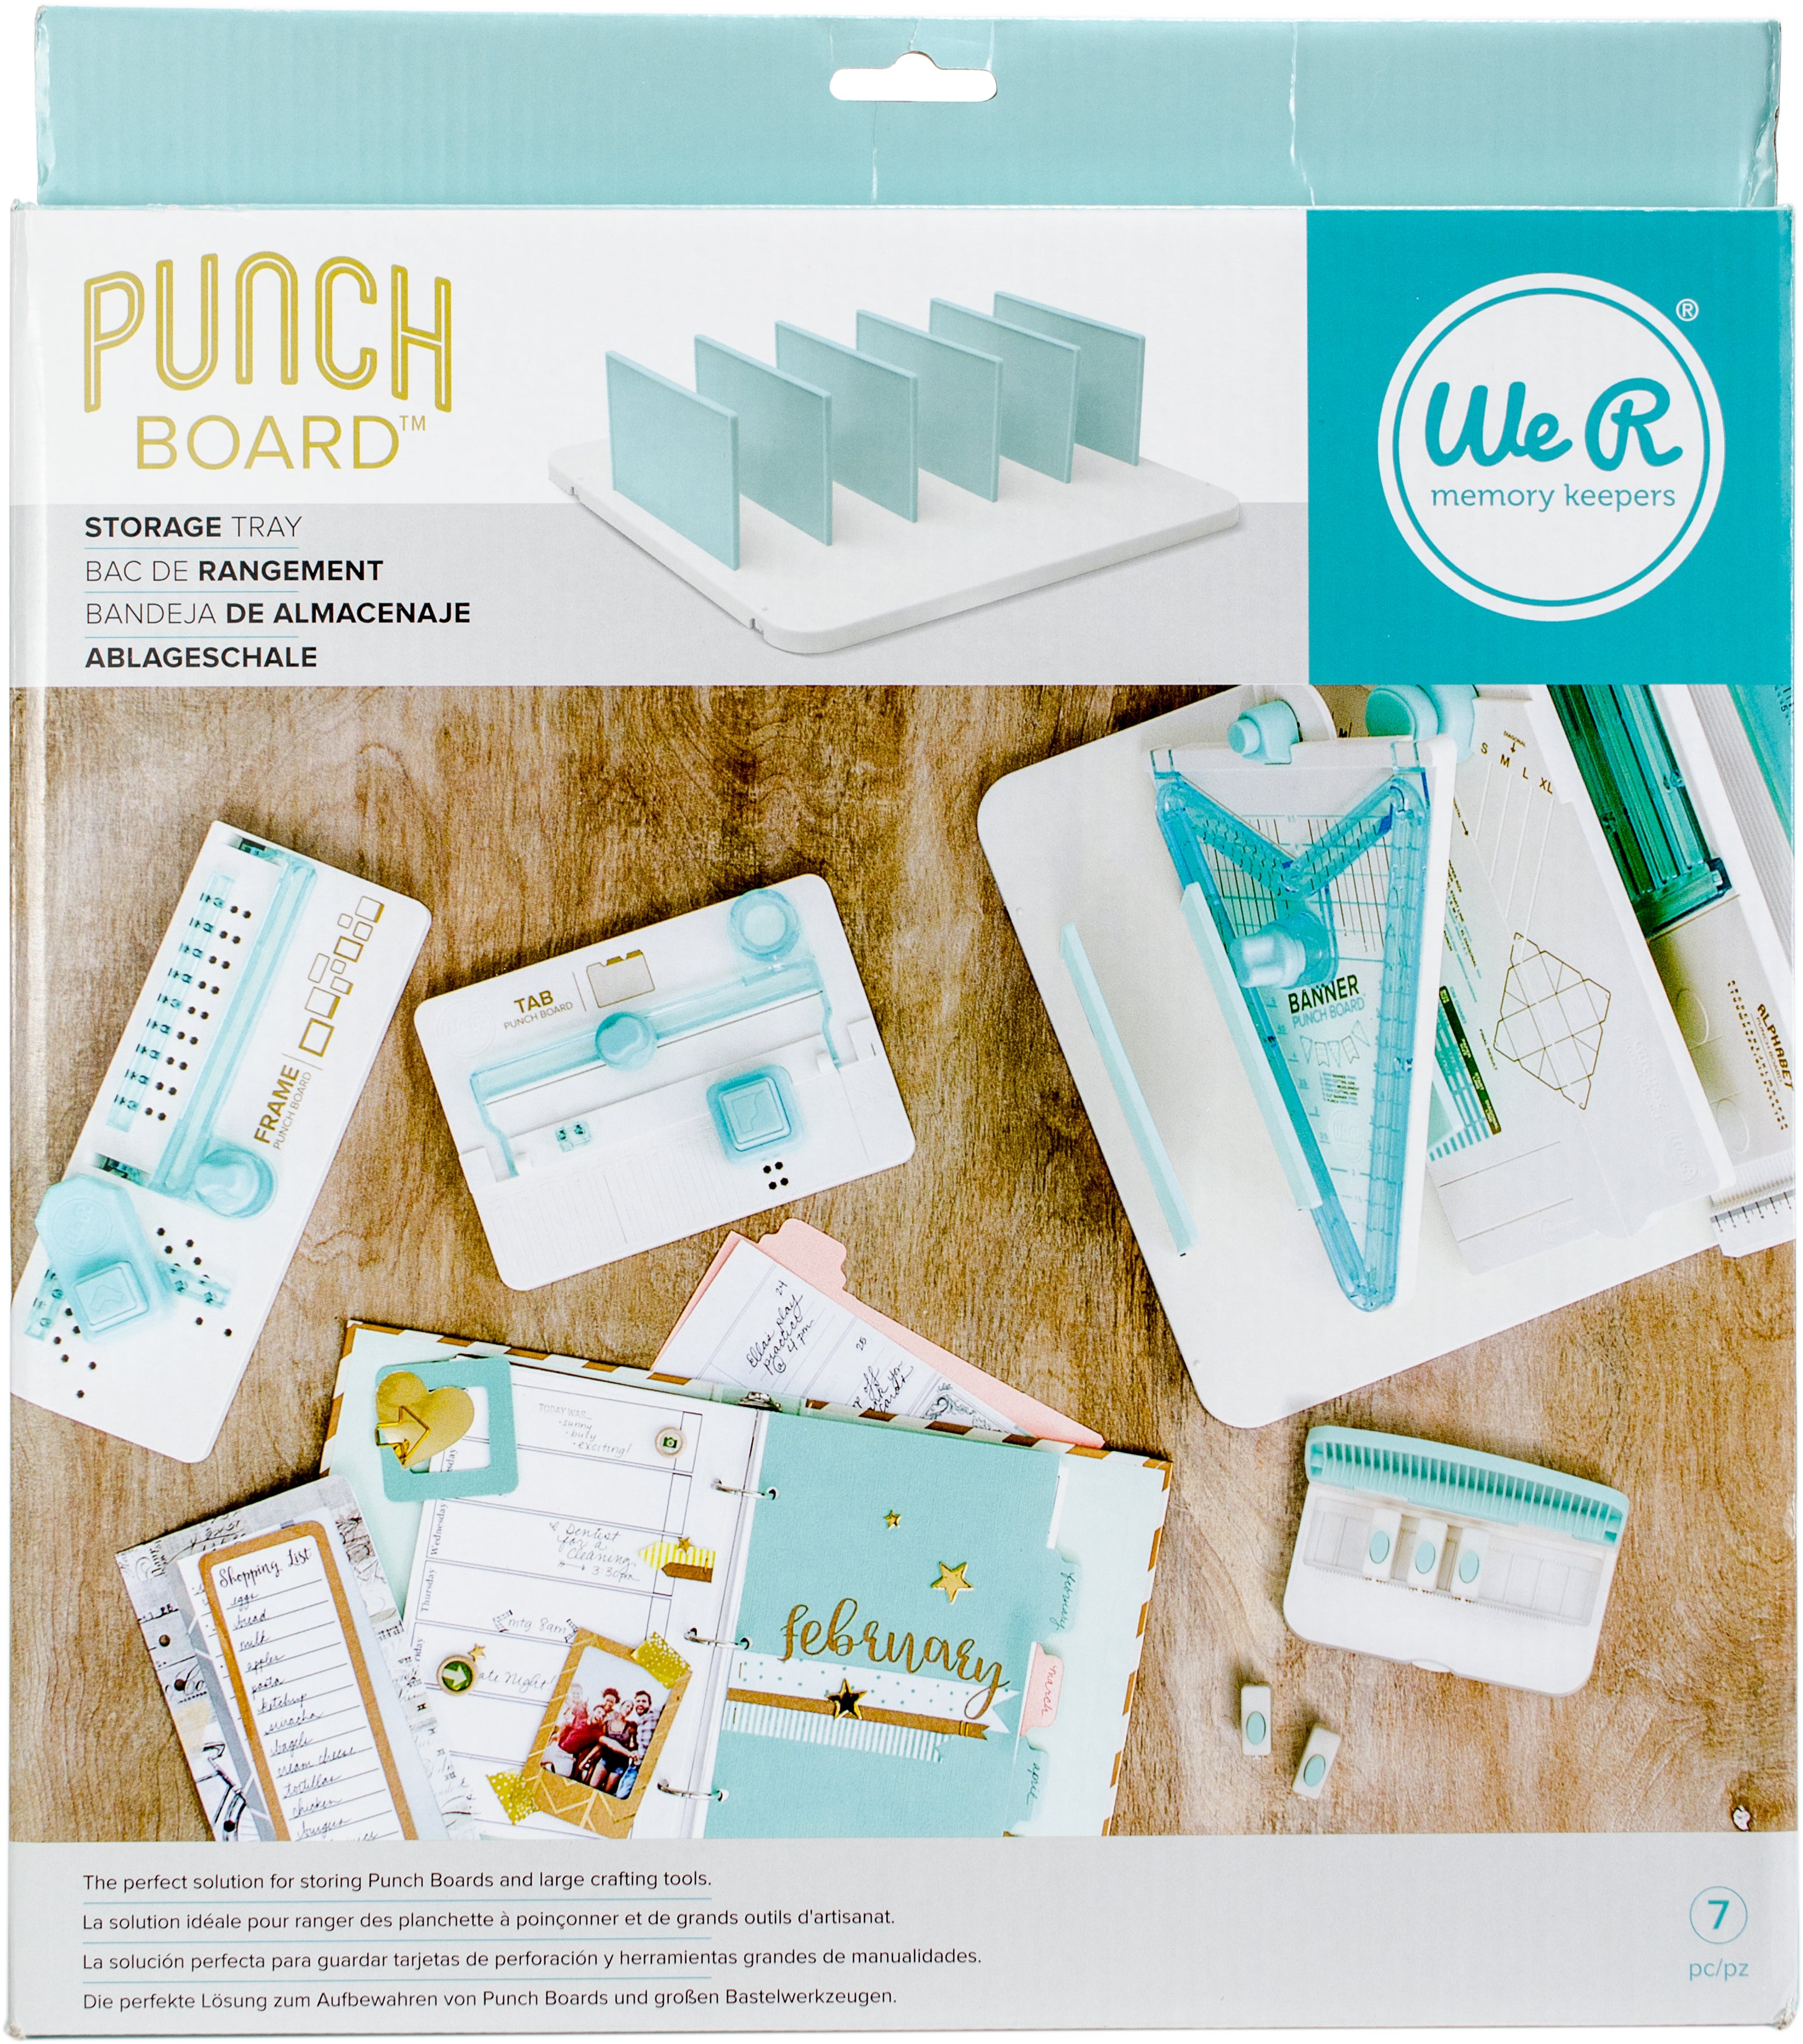 2 Options of We R Memory Keepers Punch Board Tab Punch / DIY Party